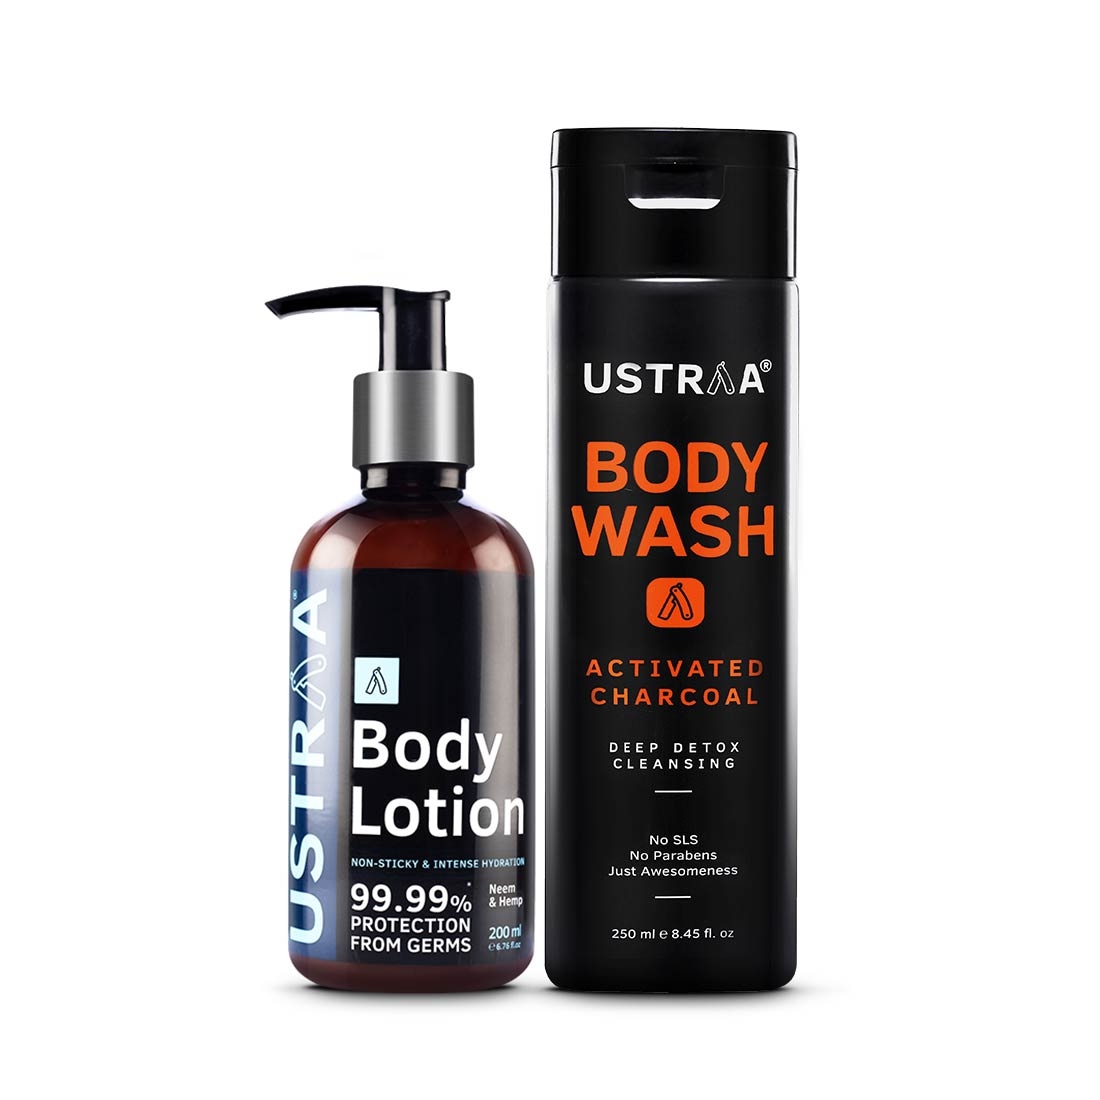 Ustraa | Ustraa Body Lotion Germ Free - 200ml & Body Wash - Activated Charcoal - 250ml
